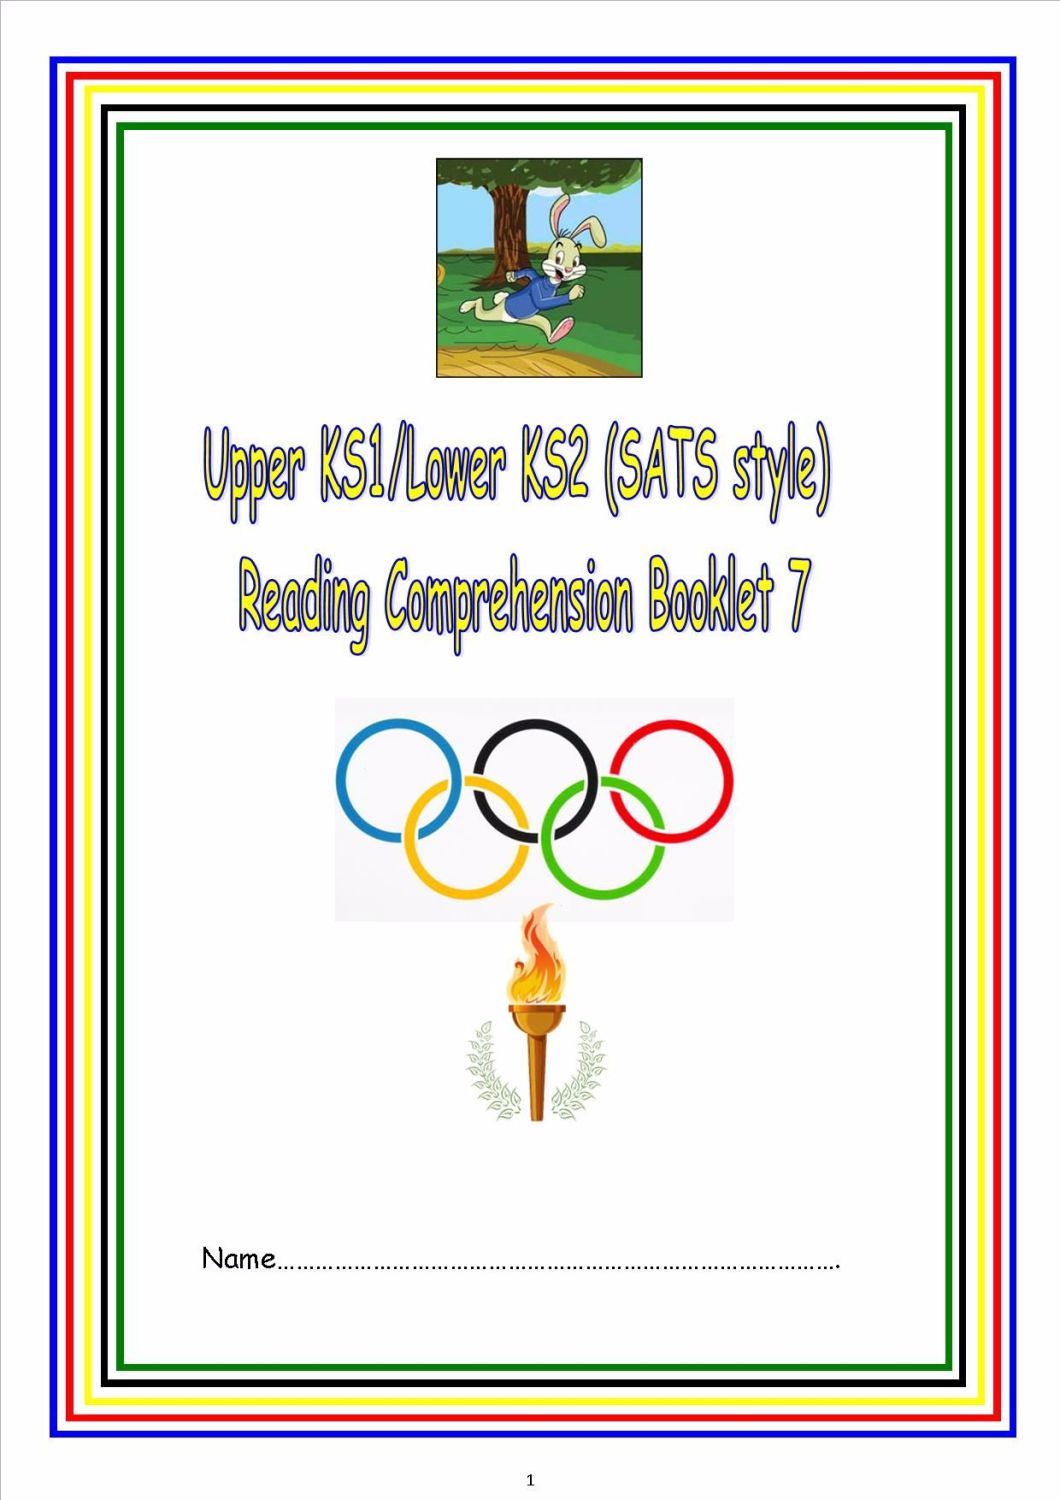 KS1/LKS2 SATs style reading comprehension booklet 7. (Olympic theme).